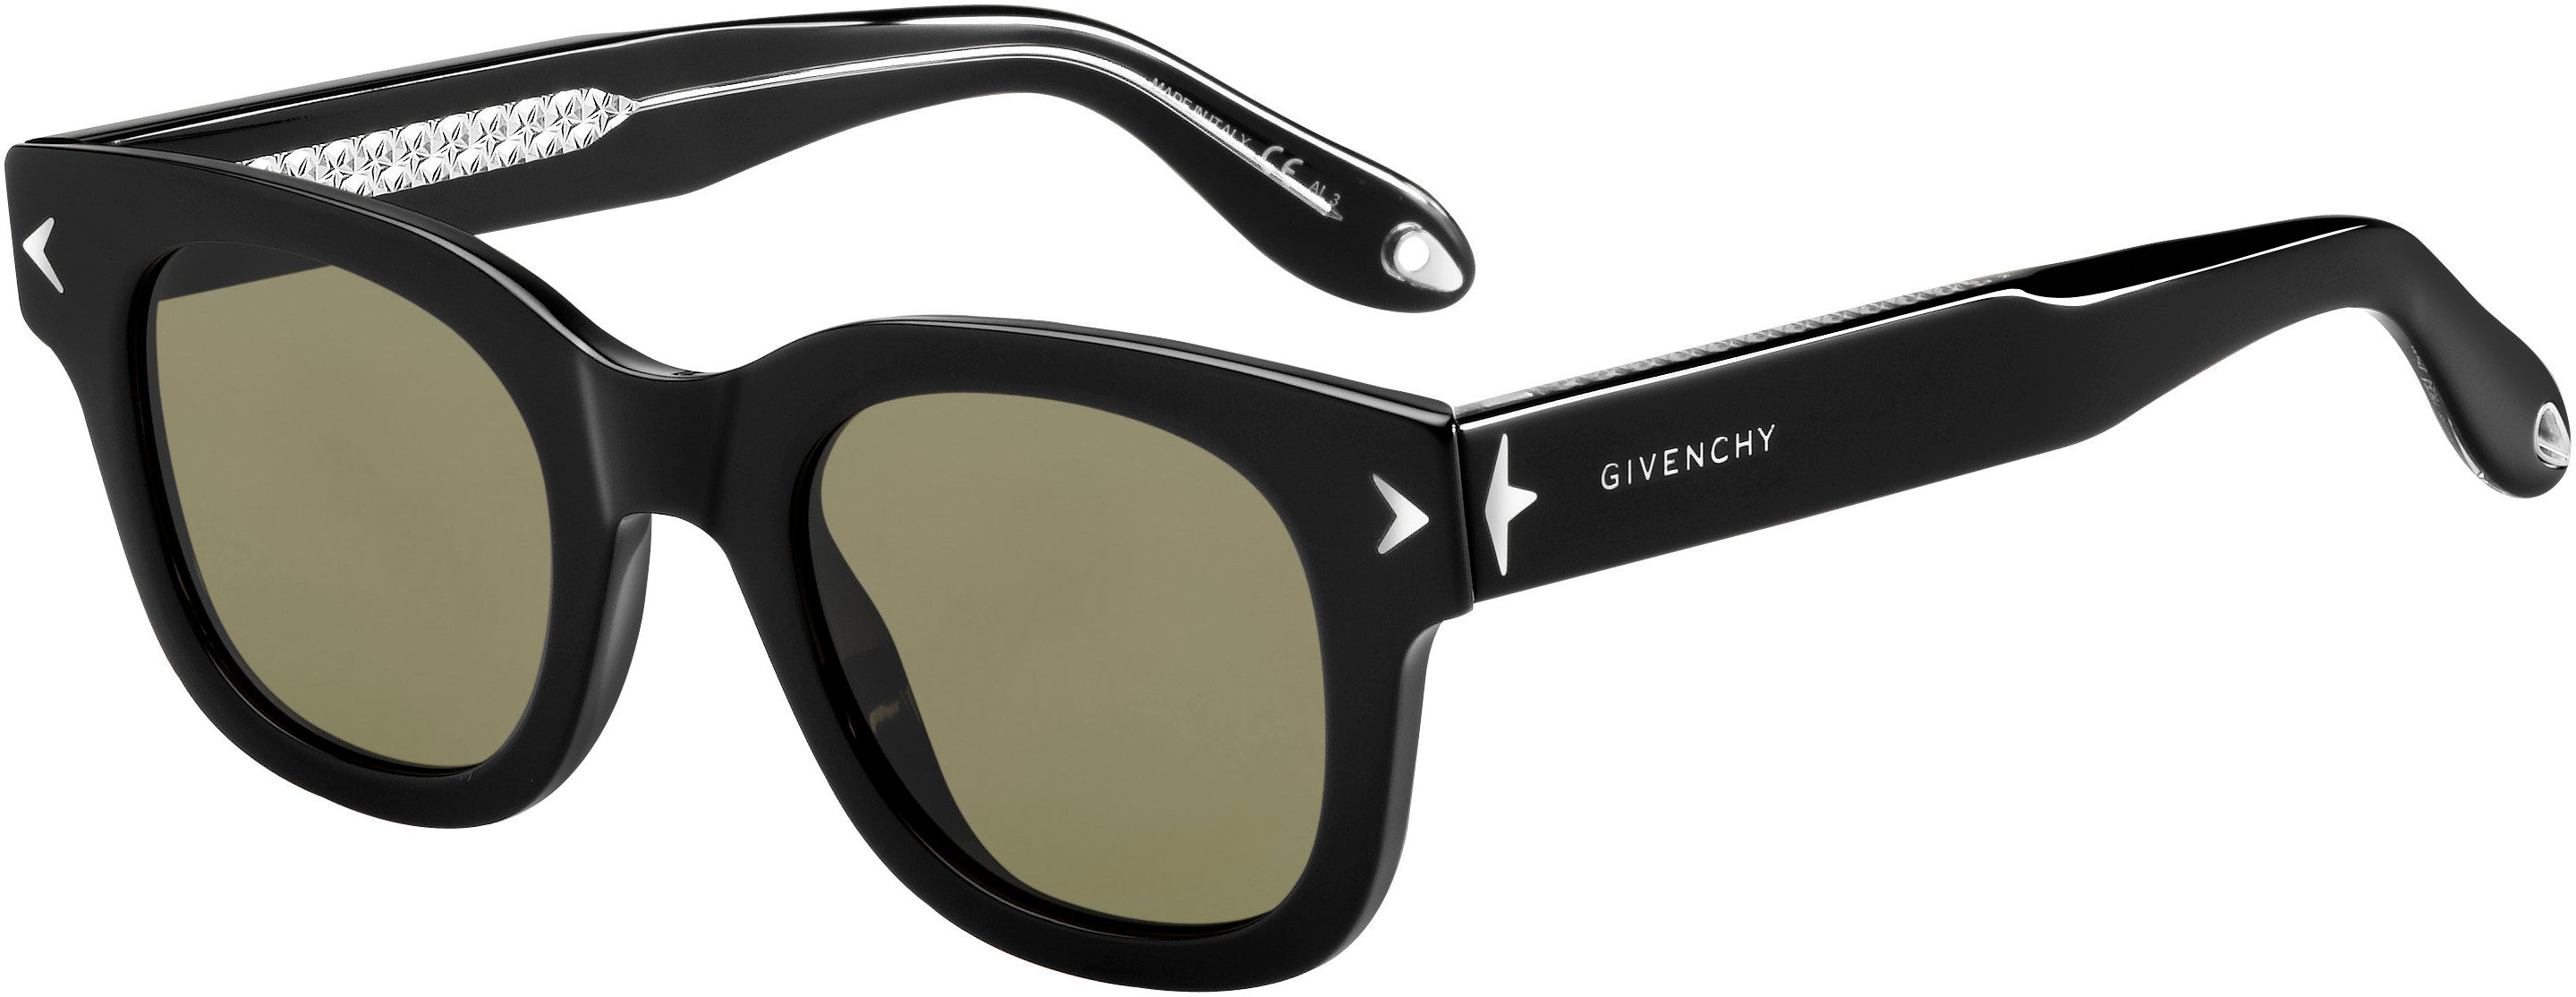  Givenchy 7037/S Rectangular Sunglasses 0Y6C-0Y6C  Black Crystal (E4 Brown)